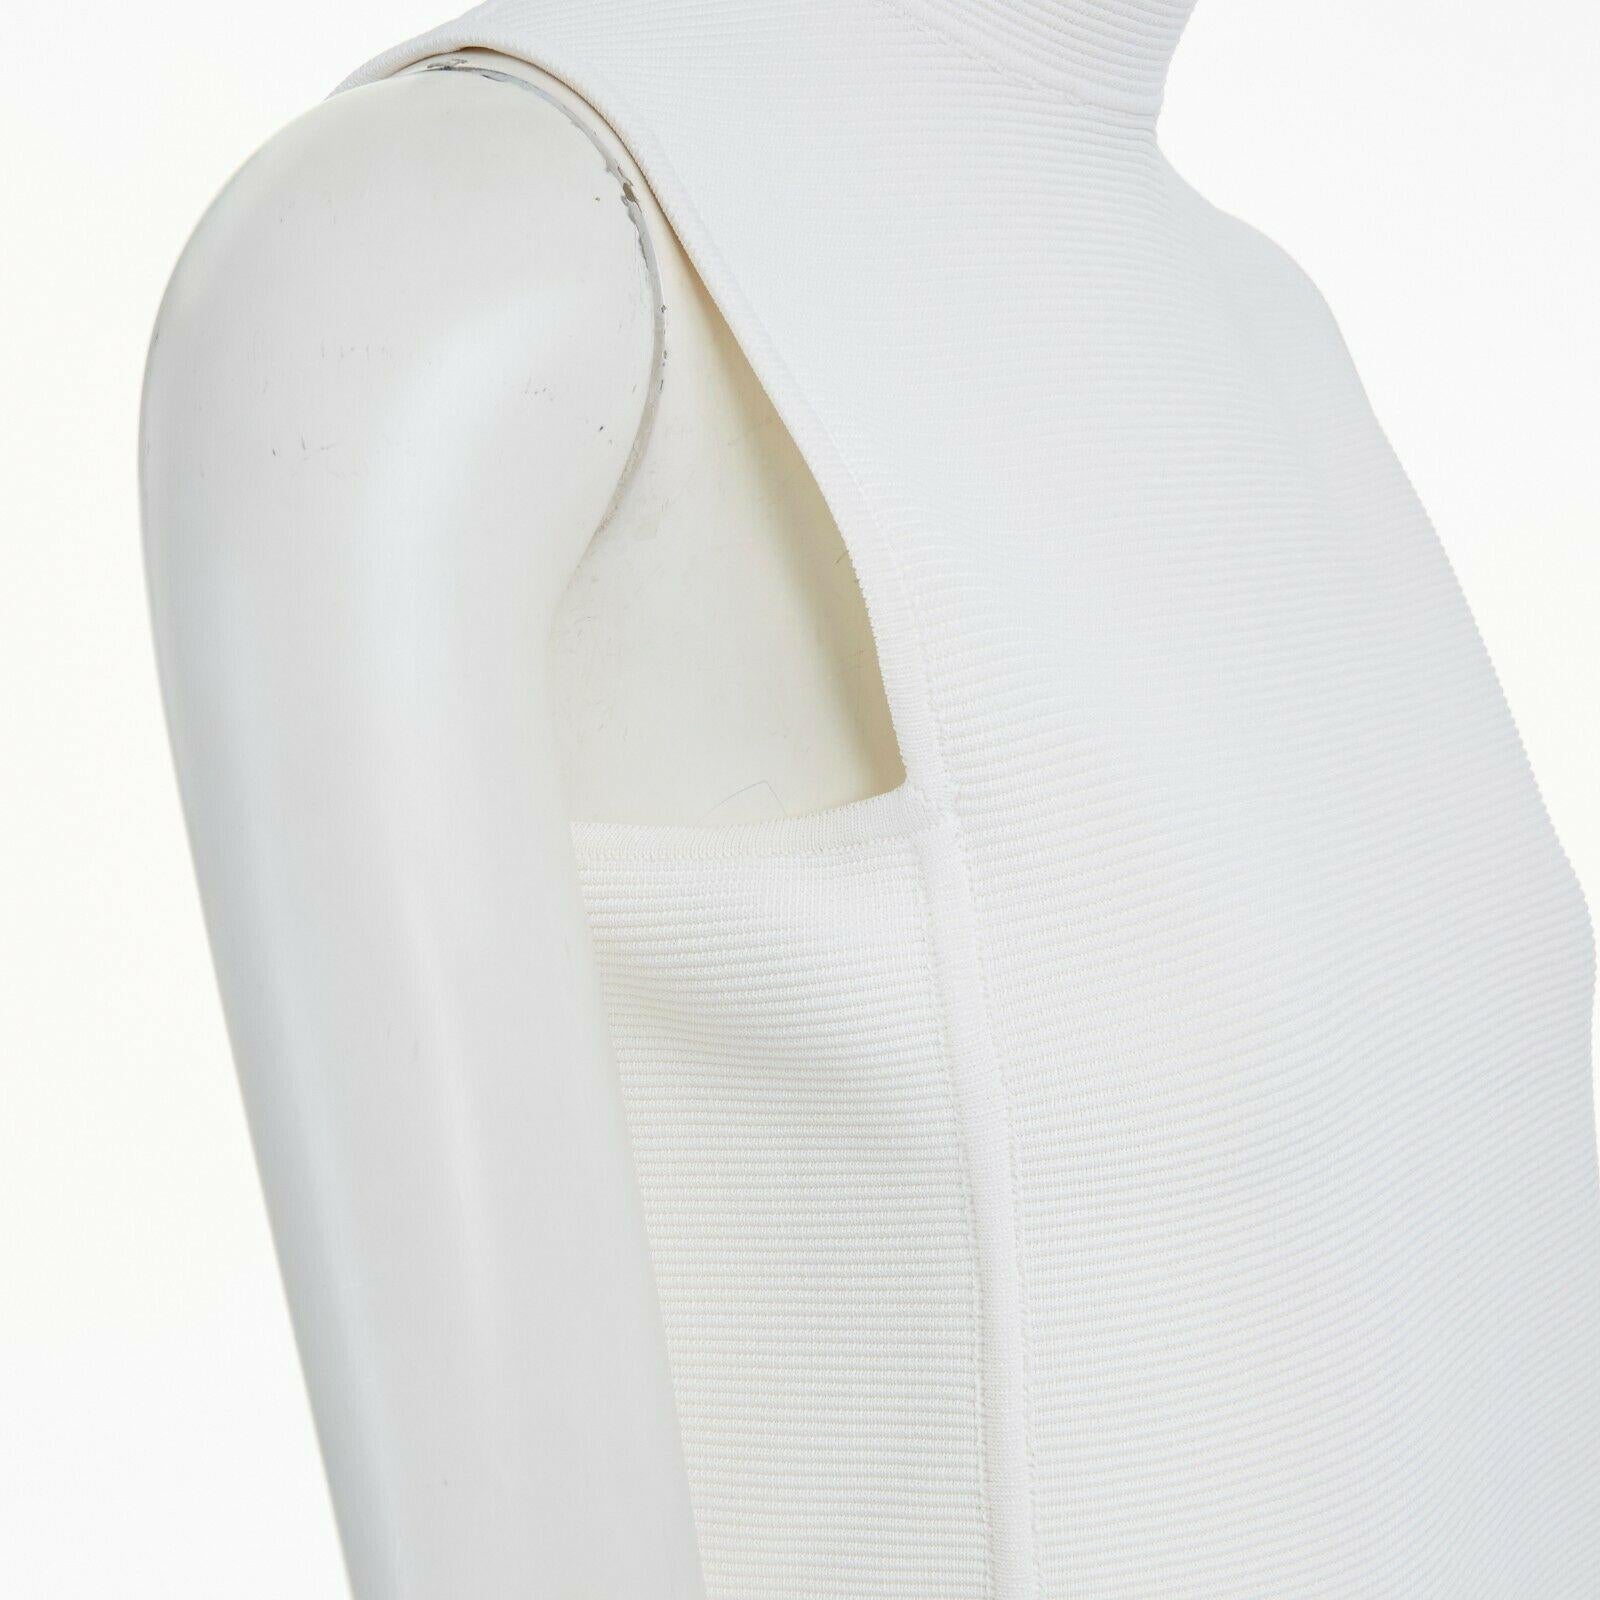 RALPH LAUREN PURPLE COLLECTION white textured knit mock collar vest top S 
Reference: LNKO/A01066 
Brand: Ralph Lauren 
Material: Viscose 
Color: White 
Pattern: Solid 
Closure: Zip 
Extra Detail: Viscose, nylon, elastane. White. Textured knit. Mock